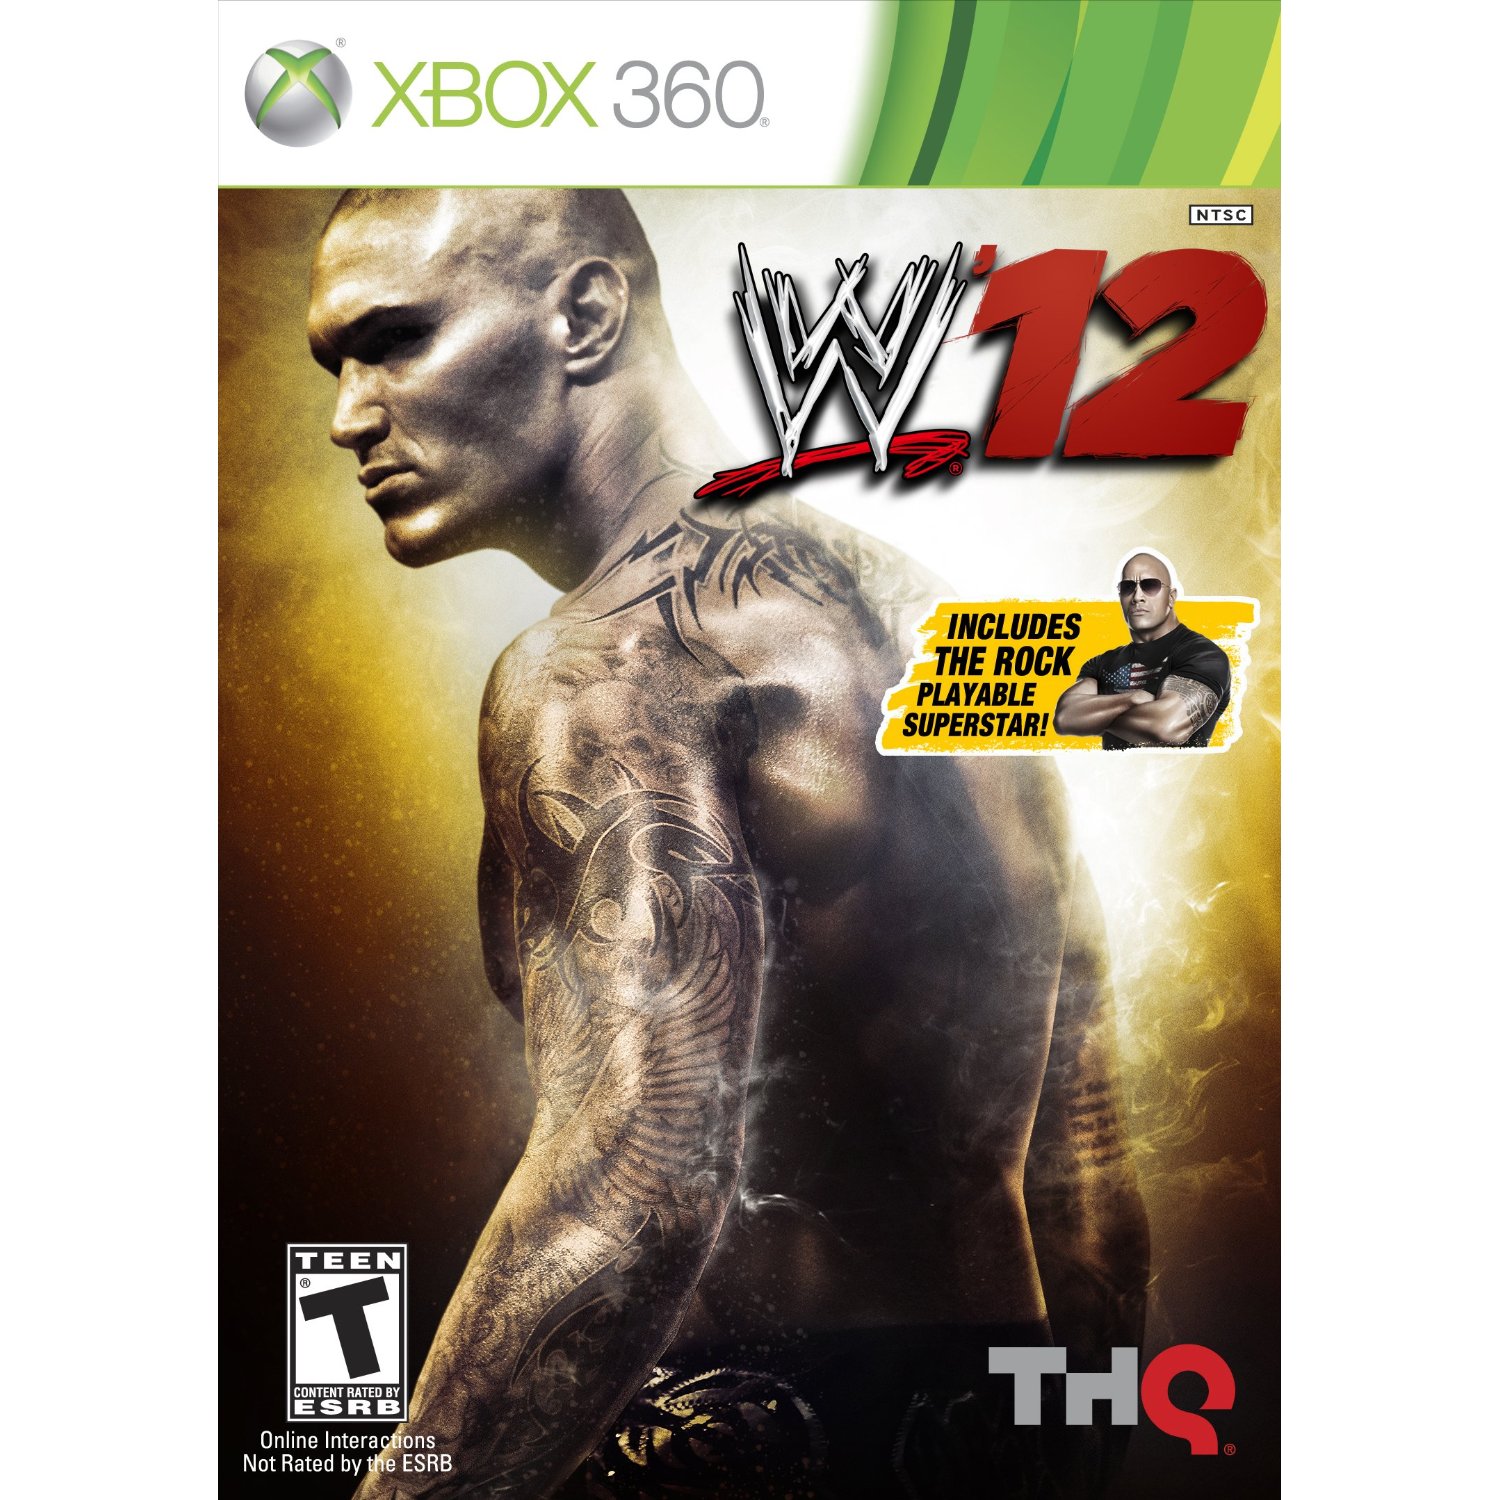 http://thetechjournal.com/wp-content/uploads/images/1111/1321270606-wwe-12--game-available-in-amazon-for-preorder-1.jpg